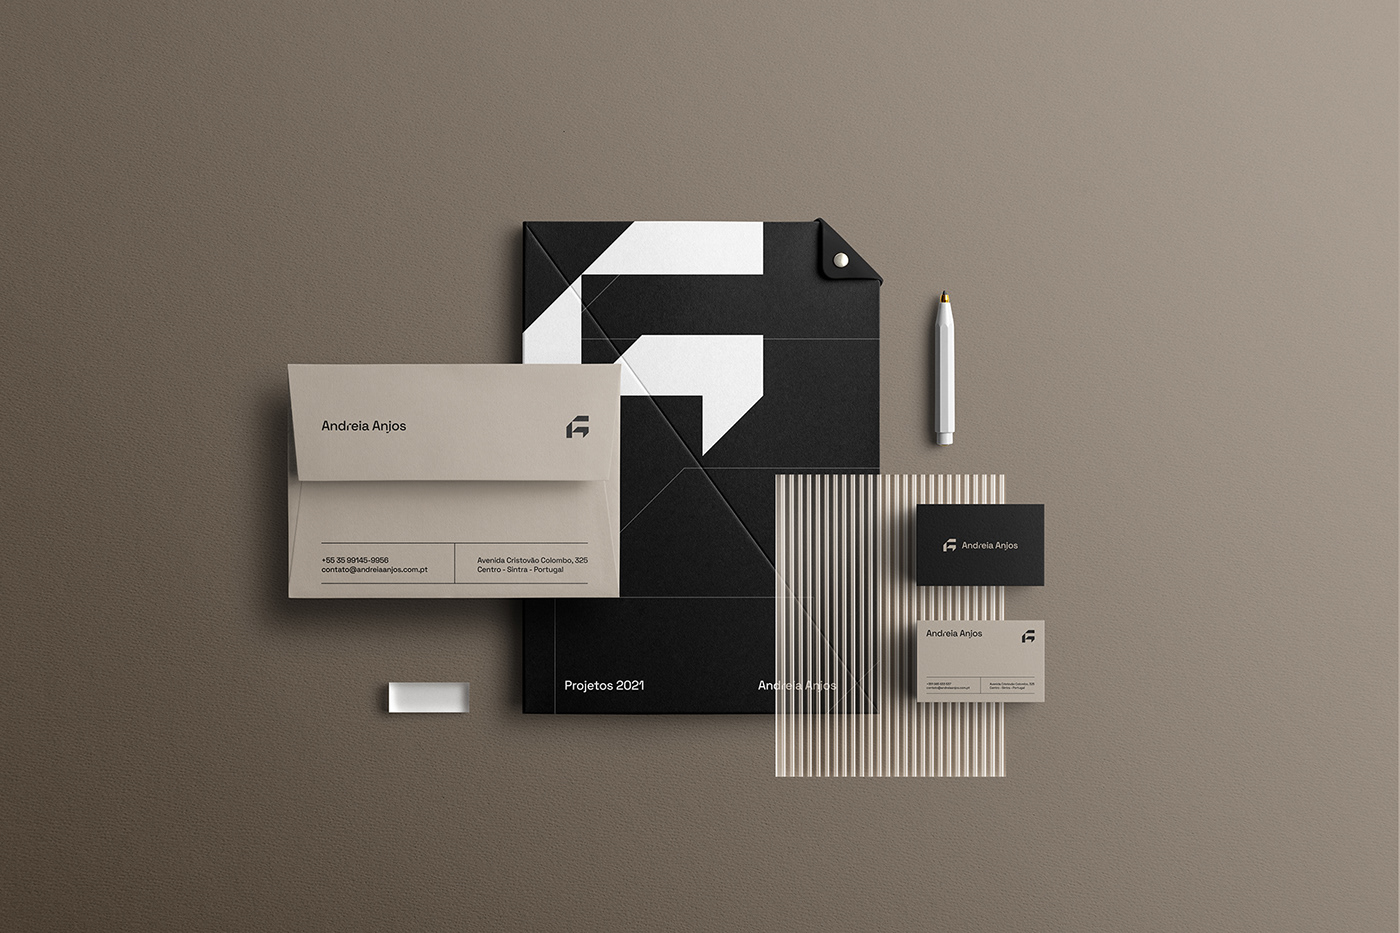 branding and visual identity artifact and material for architecture firm Andreia Anjos by Luiz Design